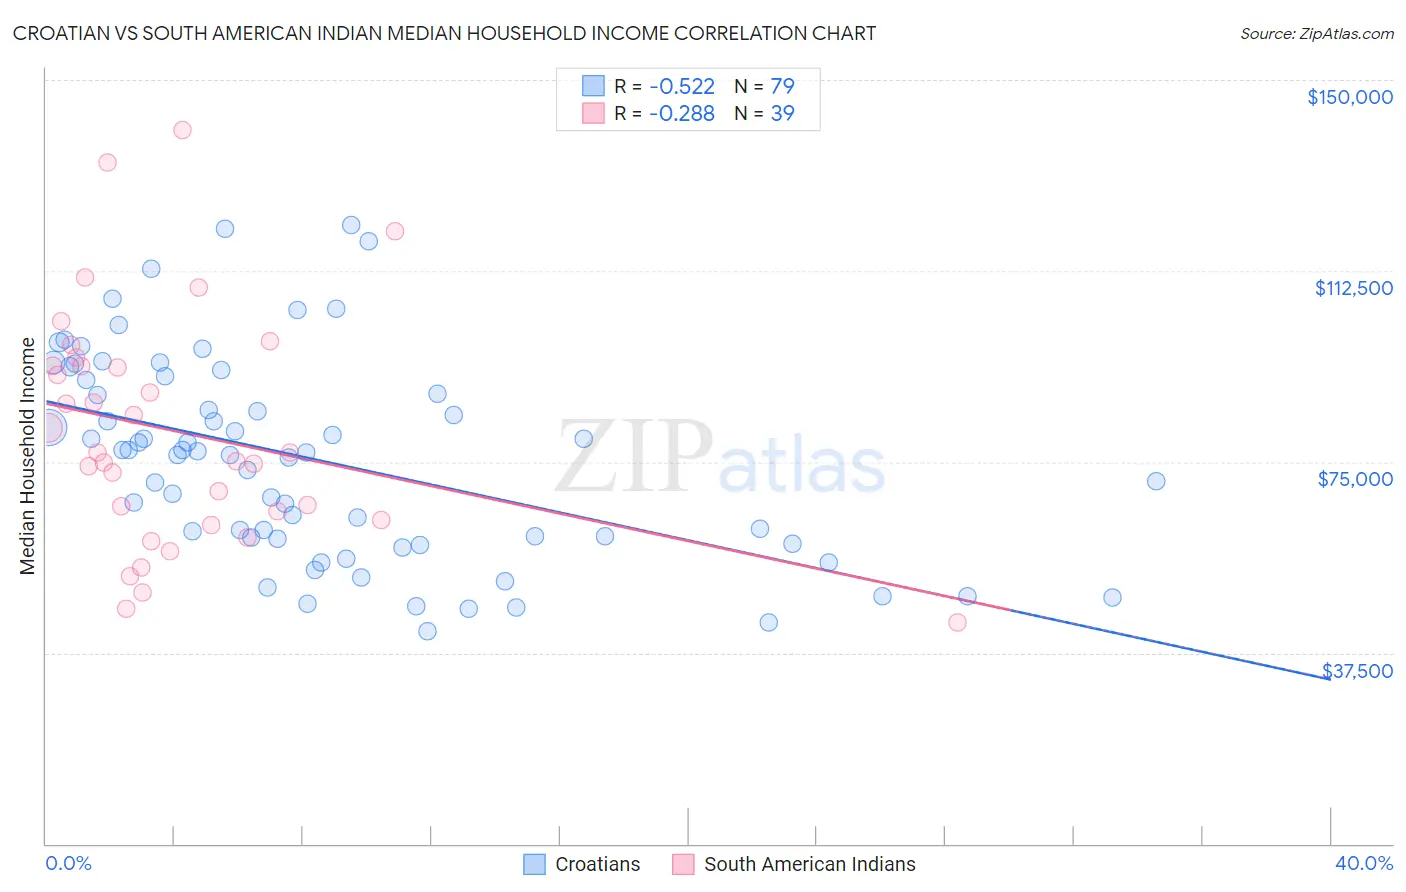 Croatian vs South American Indian Median Household Income